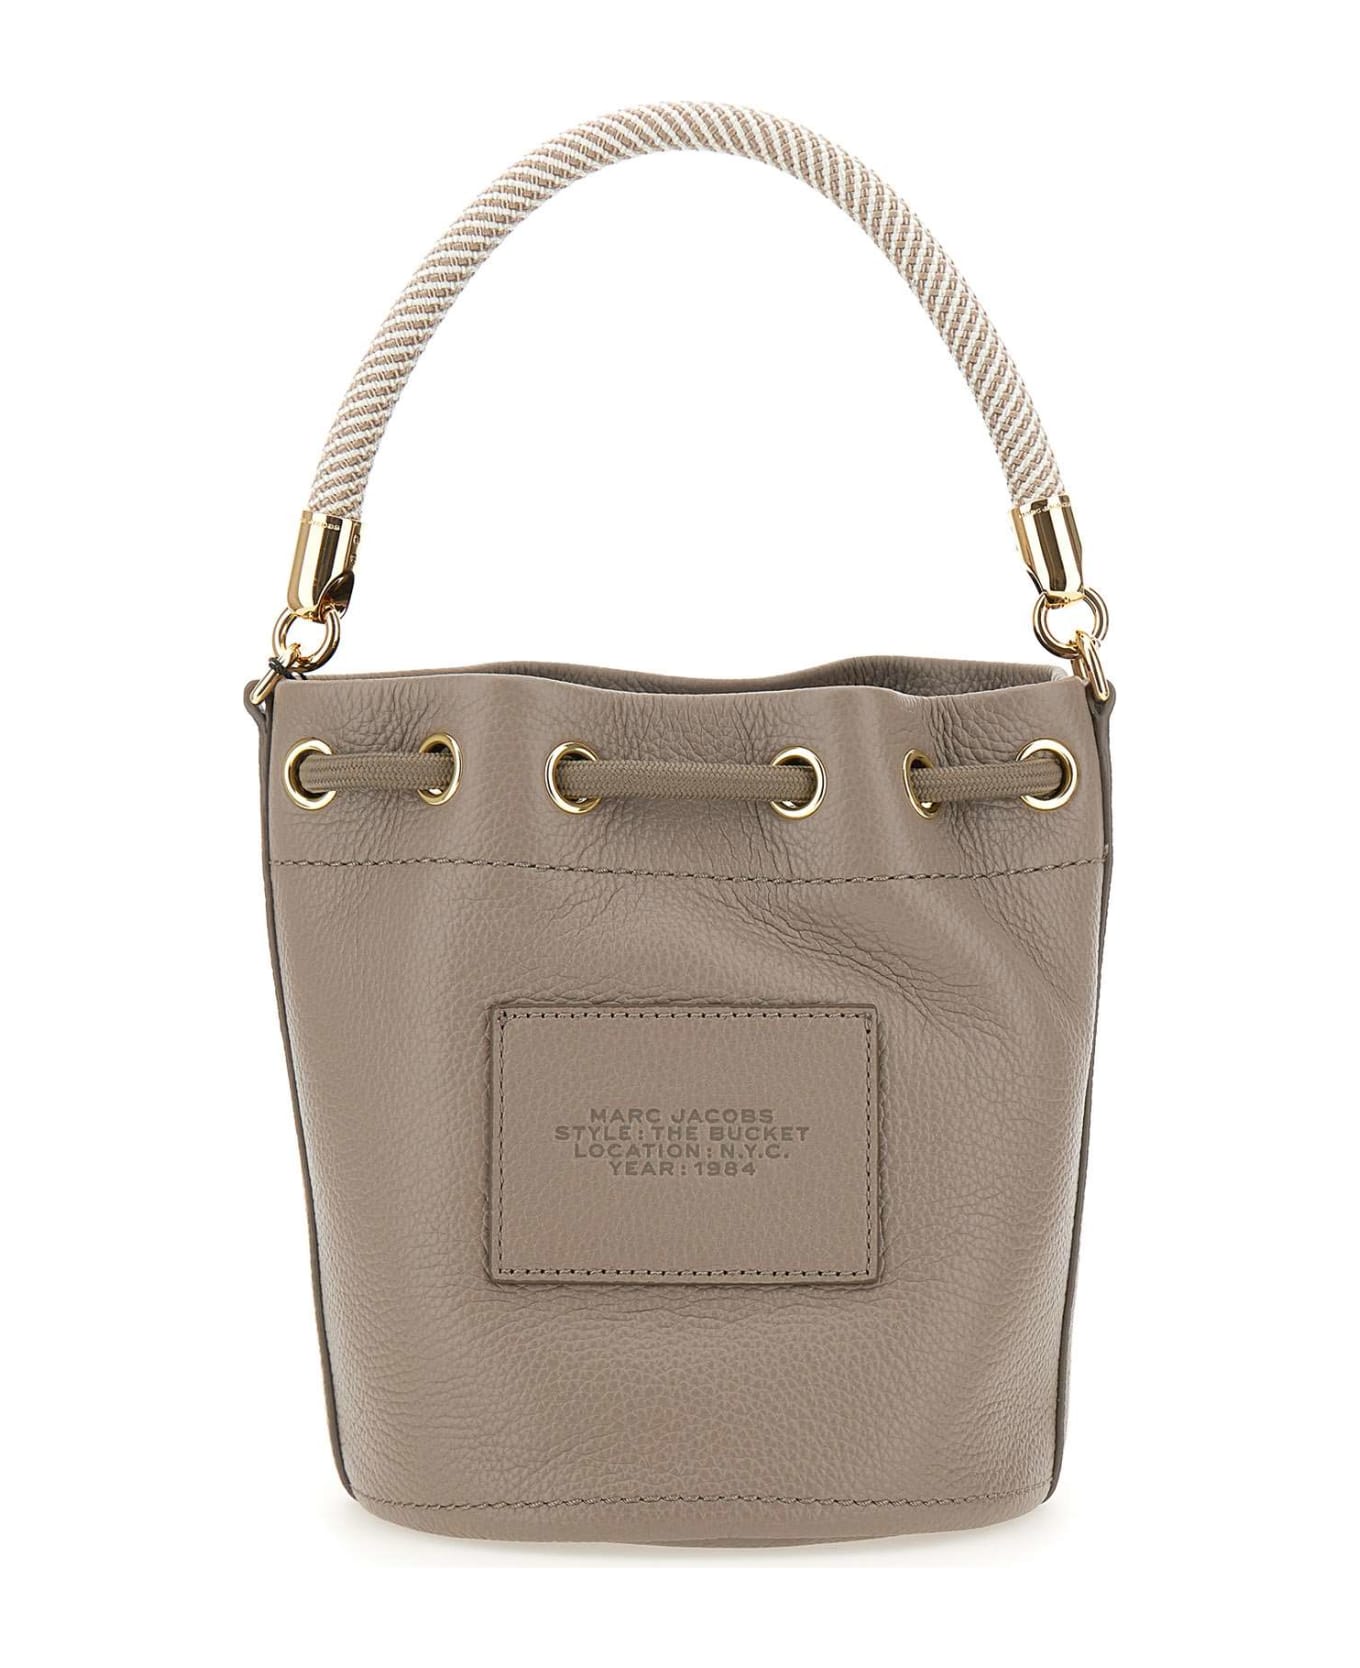 Marc Jacobs The Leather Bucket Bag - GREY